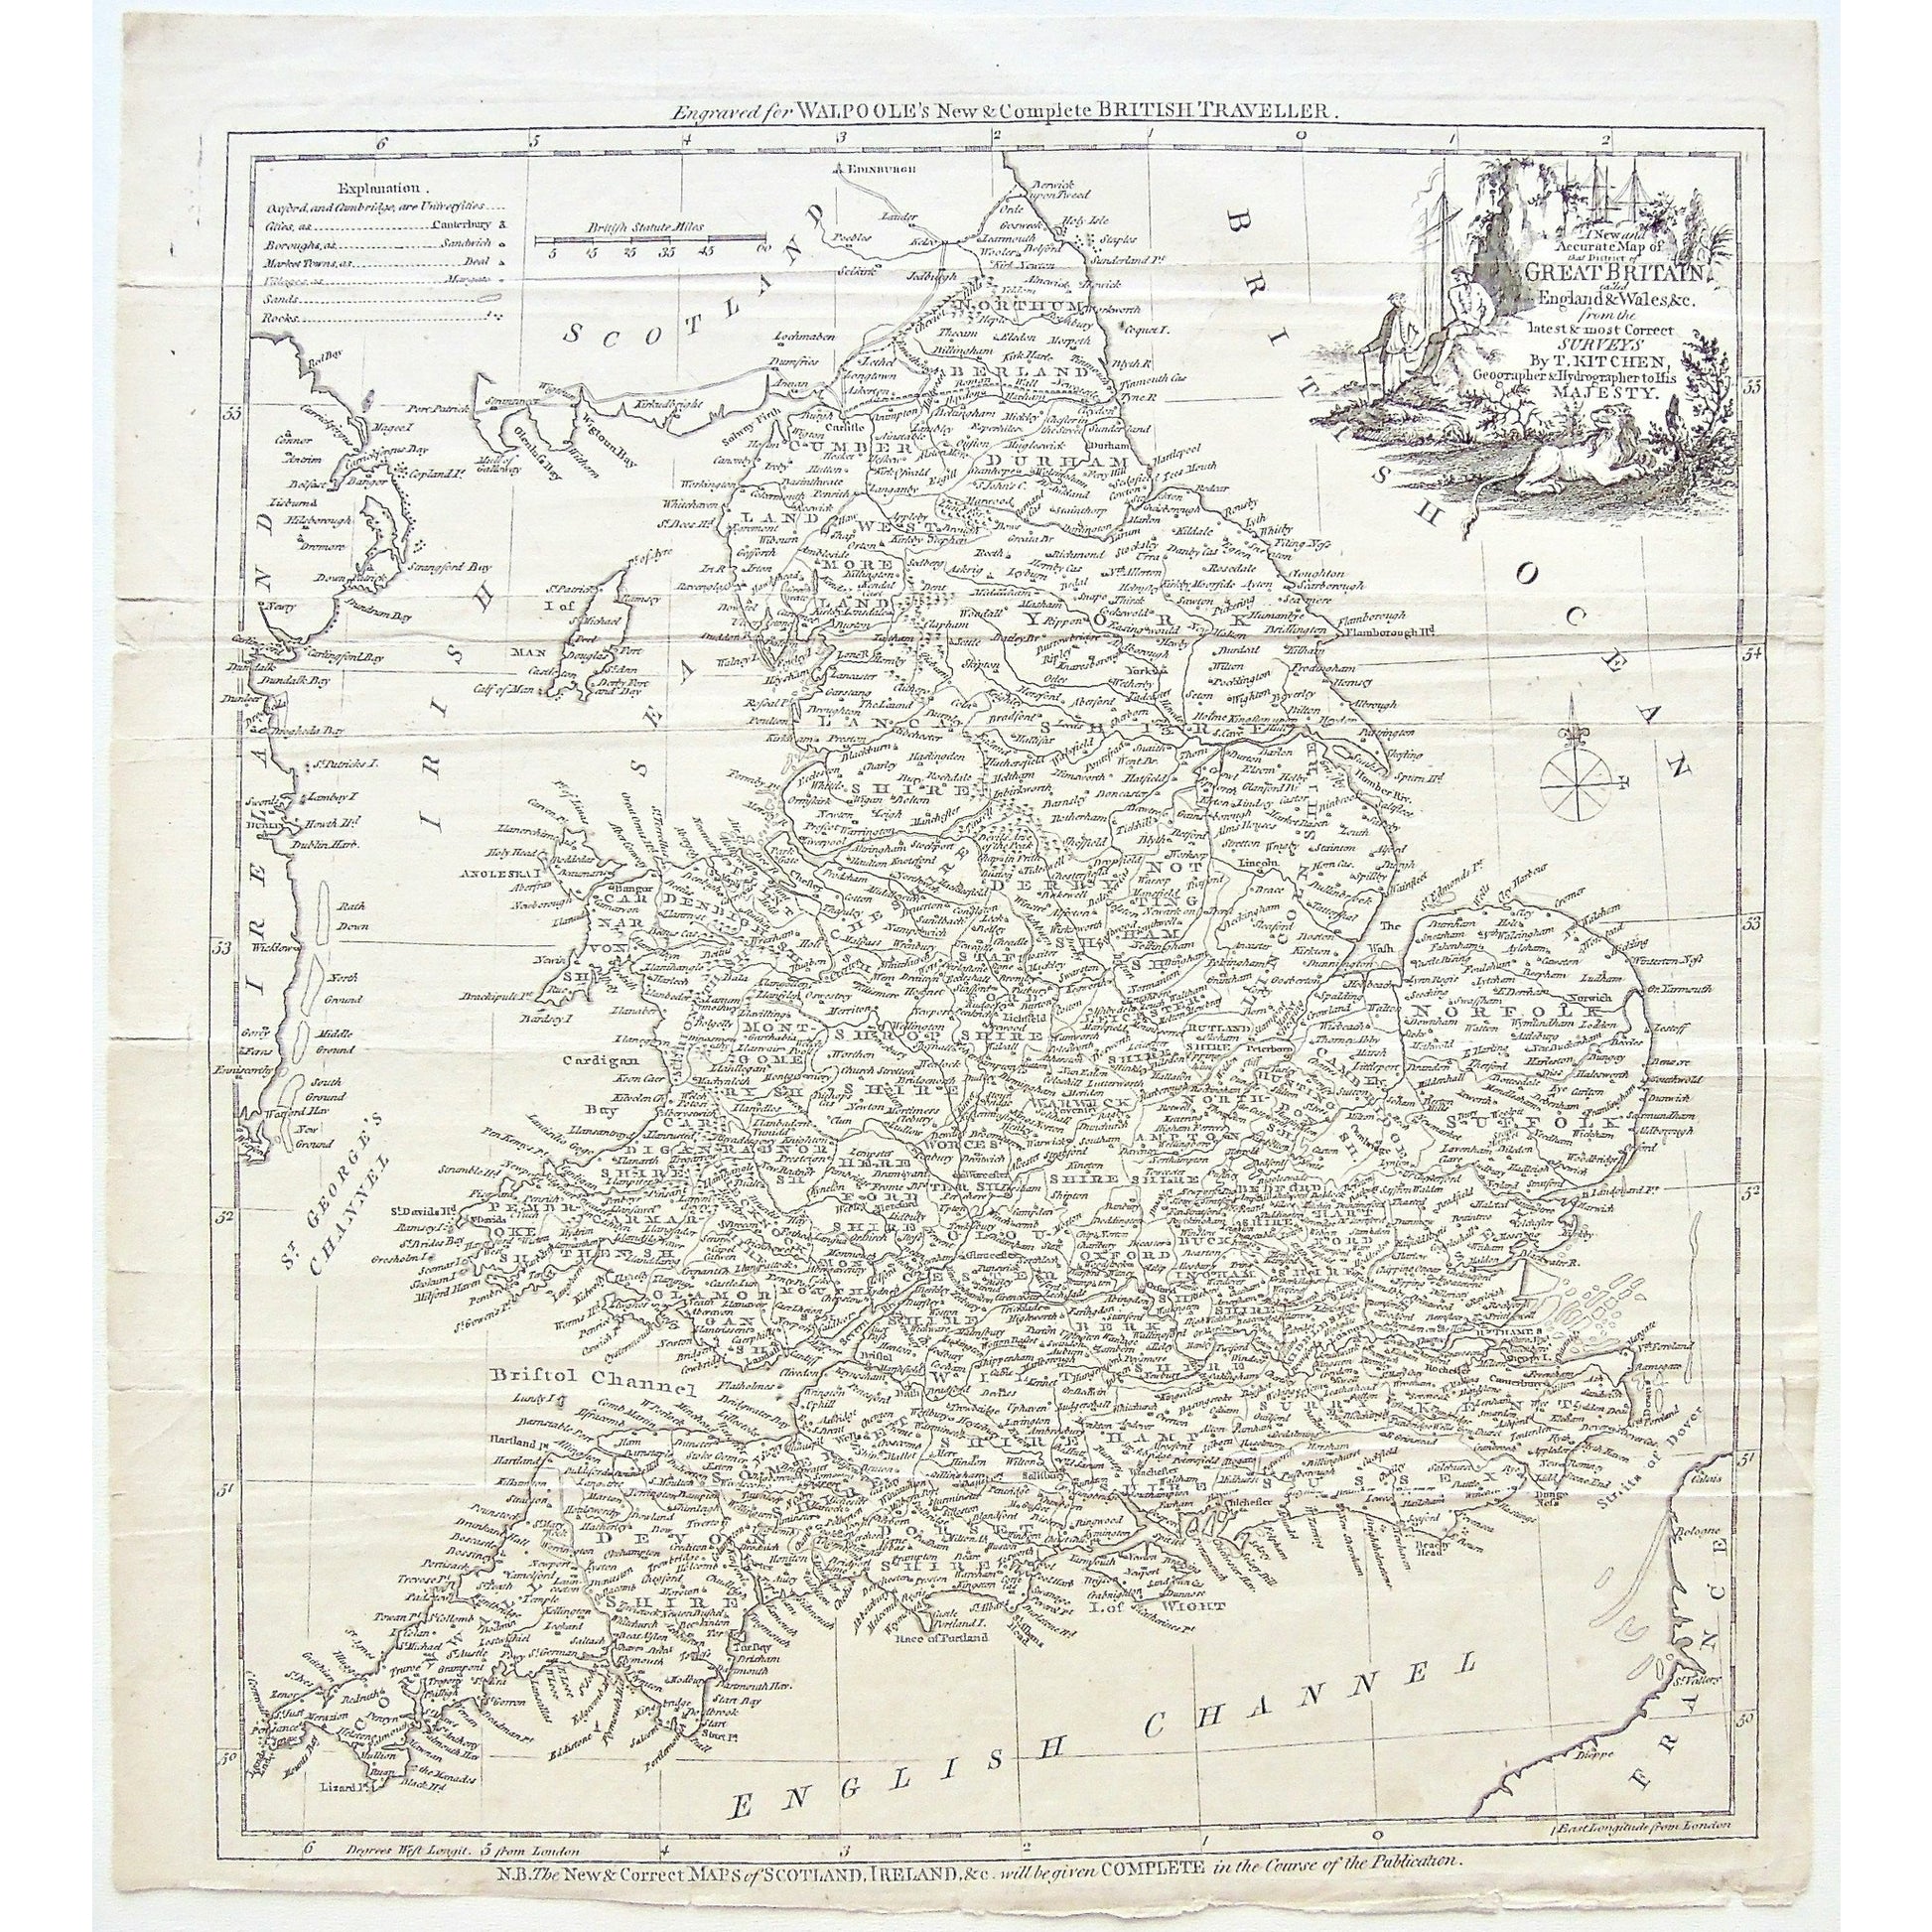 Walpoole, Great Britain, England, Wales, Surveys, Thomas Kitchin, Kitchin, New & Complete British Traveller, British Traveller, British, Traveller, Geographer, Hydrographer, His Majesty, Scotland, British Ocean, Irish Sea, Ireland, St. George's Channel, Bristol Channel, English Channel, Straits of Dover, France, Map, Mapping, Maps, Chart, Charts, Charting, 1757, Copperplate, Copper, Engraving, Antique Map, Antique Maps, Antique Print, Antique prints, Wall map, Wall decor, art, history, Original, print, Anti